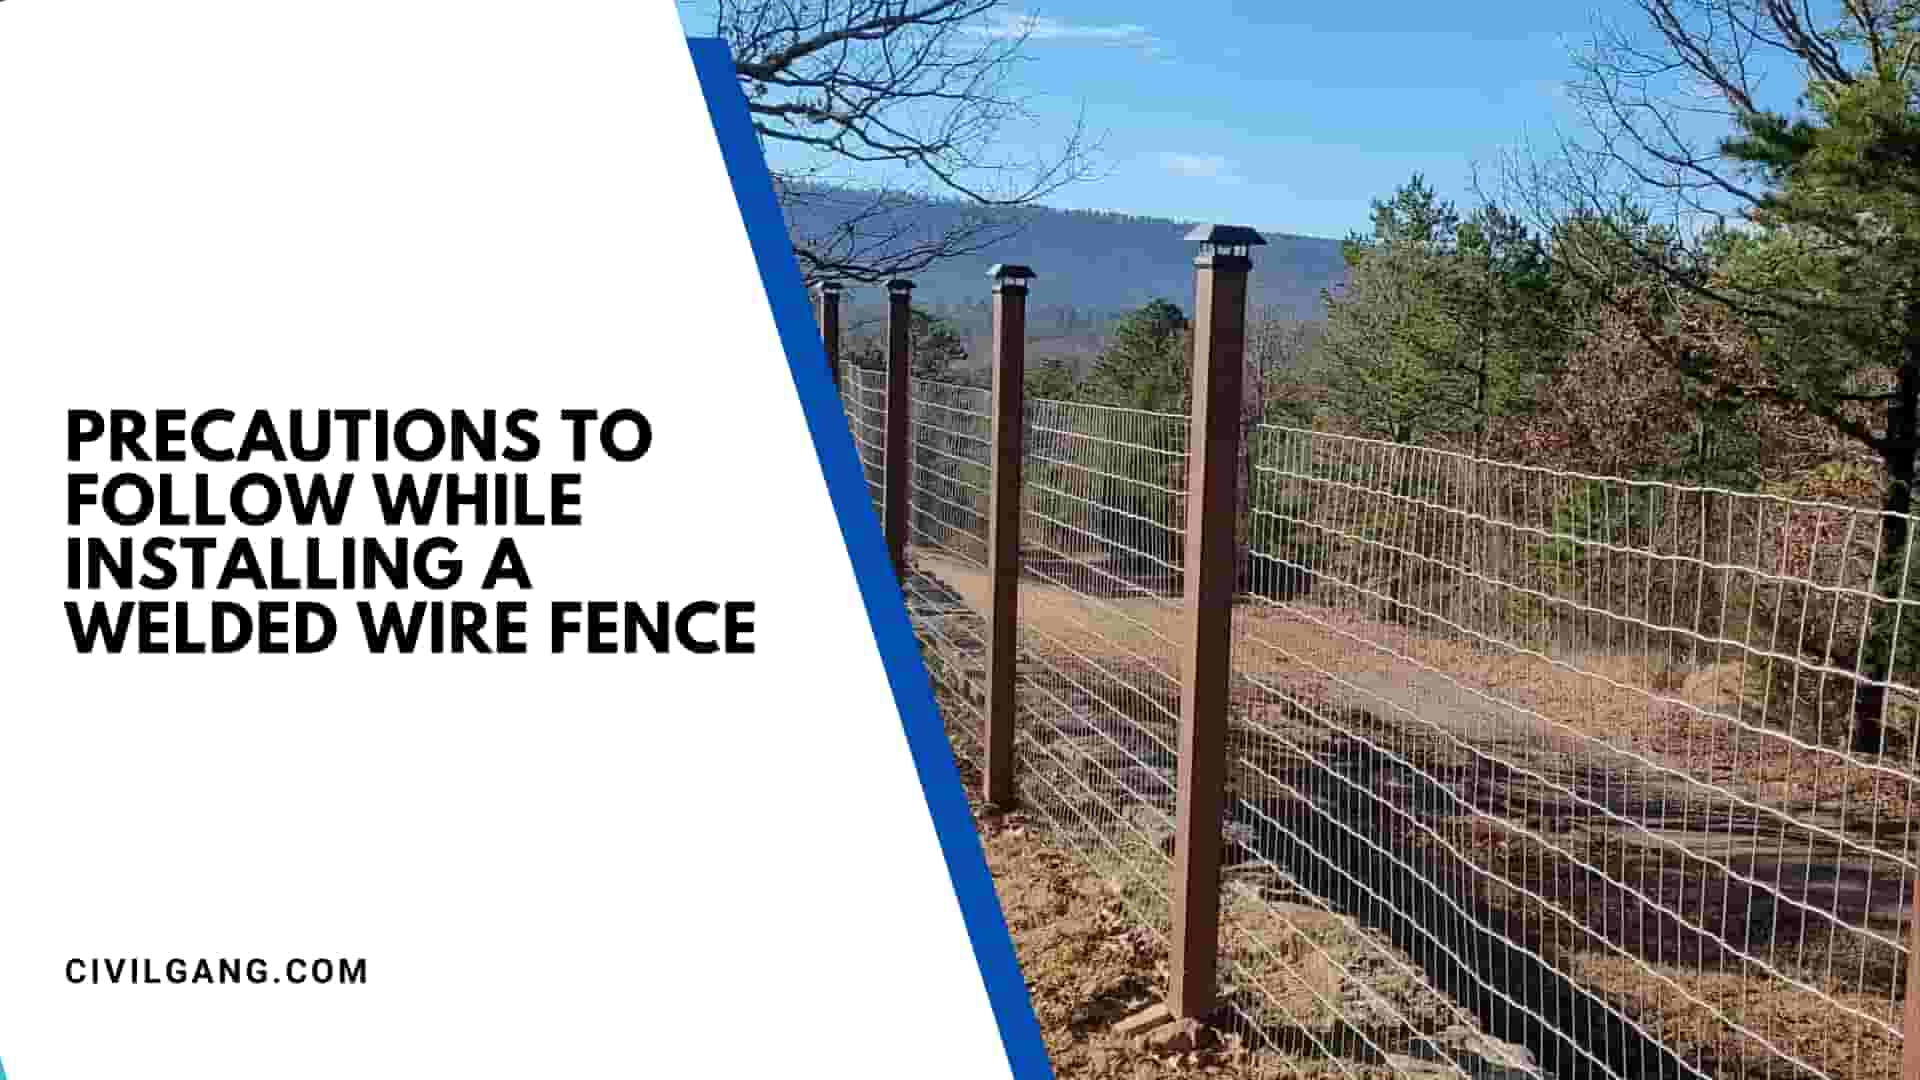 Precautions to Follow While Installing a Welded Wire Fence